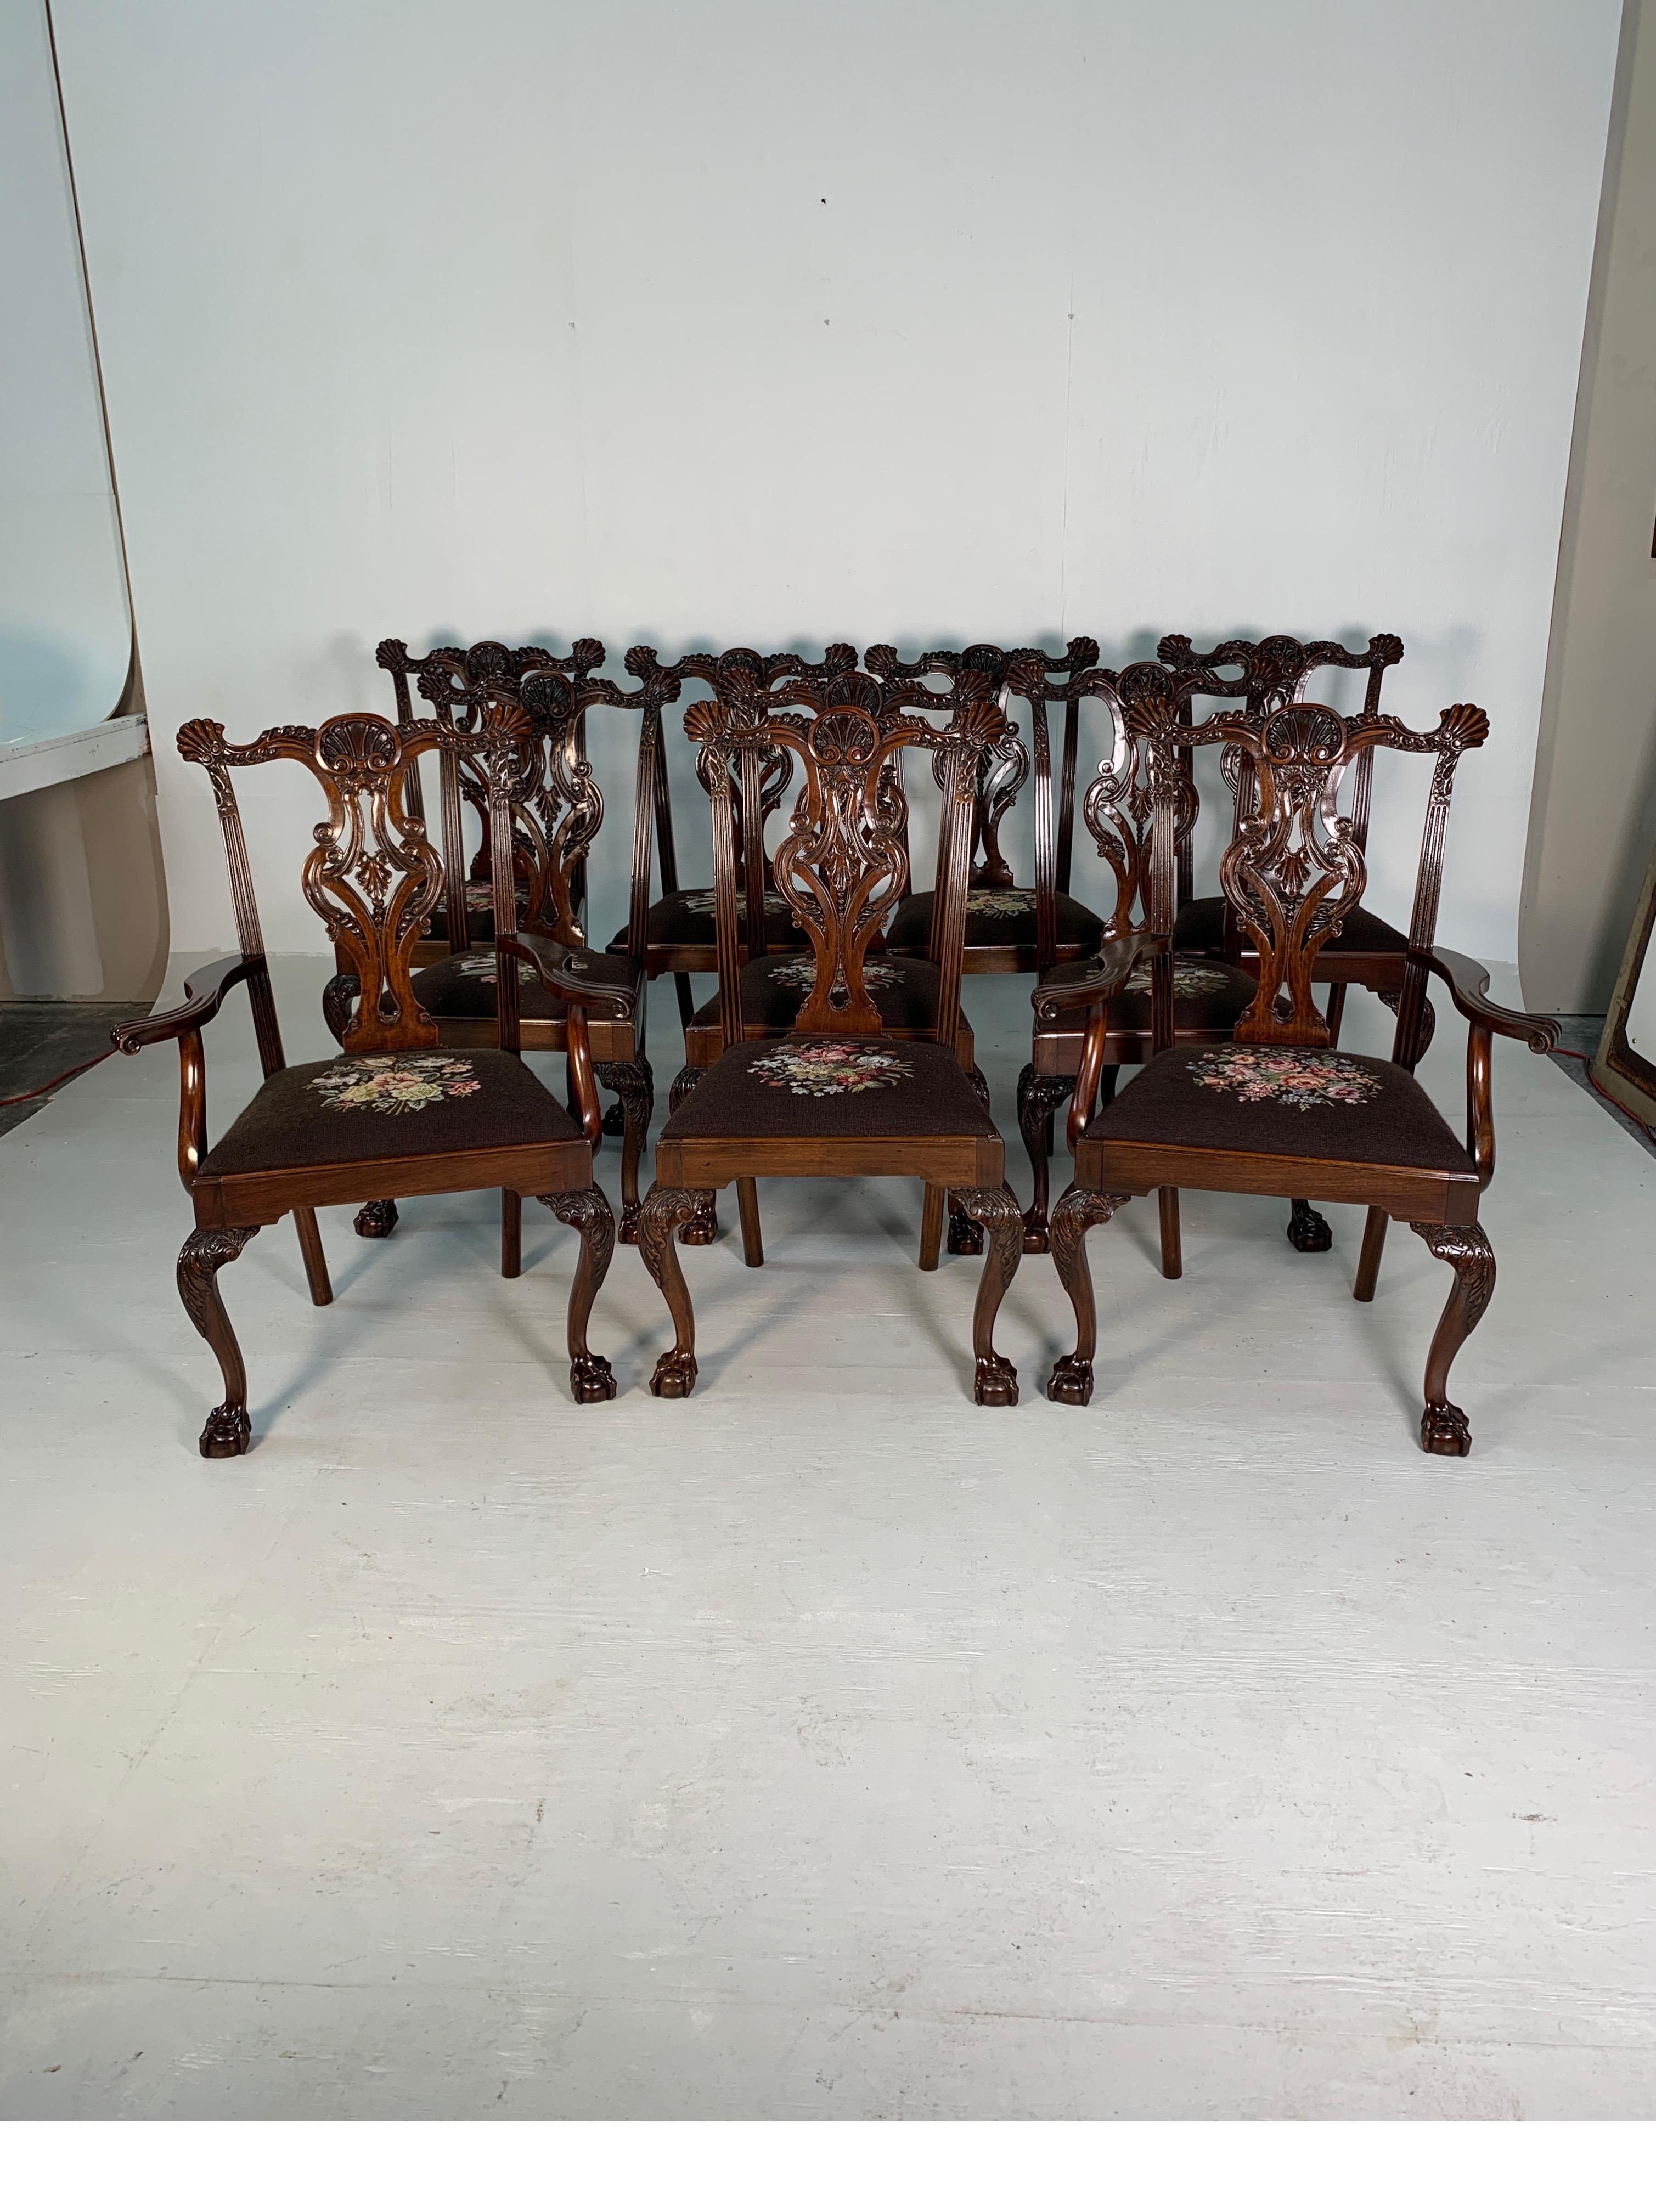 Set of ten beautifully hand carved mahogany Chippendale style chairs, circa 1870.
Magnificent detailed carving with great patina, two armchairs and eight side chairs.
Really a beautiful addition and statement to any dining room table.
Dimensions: